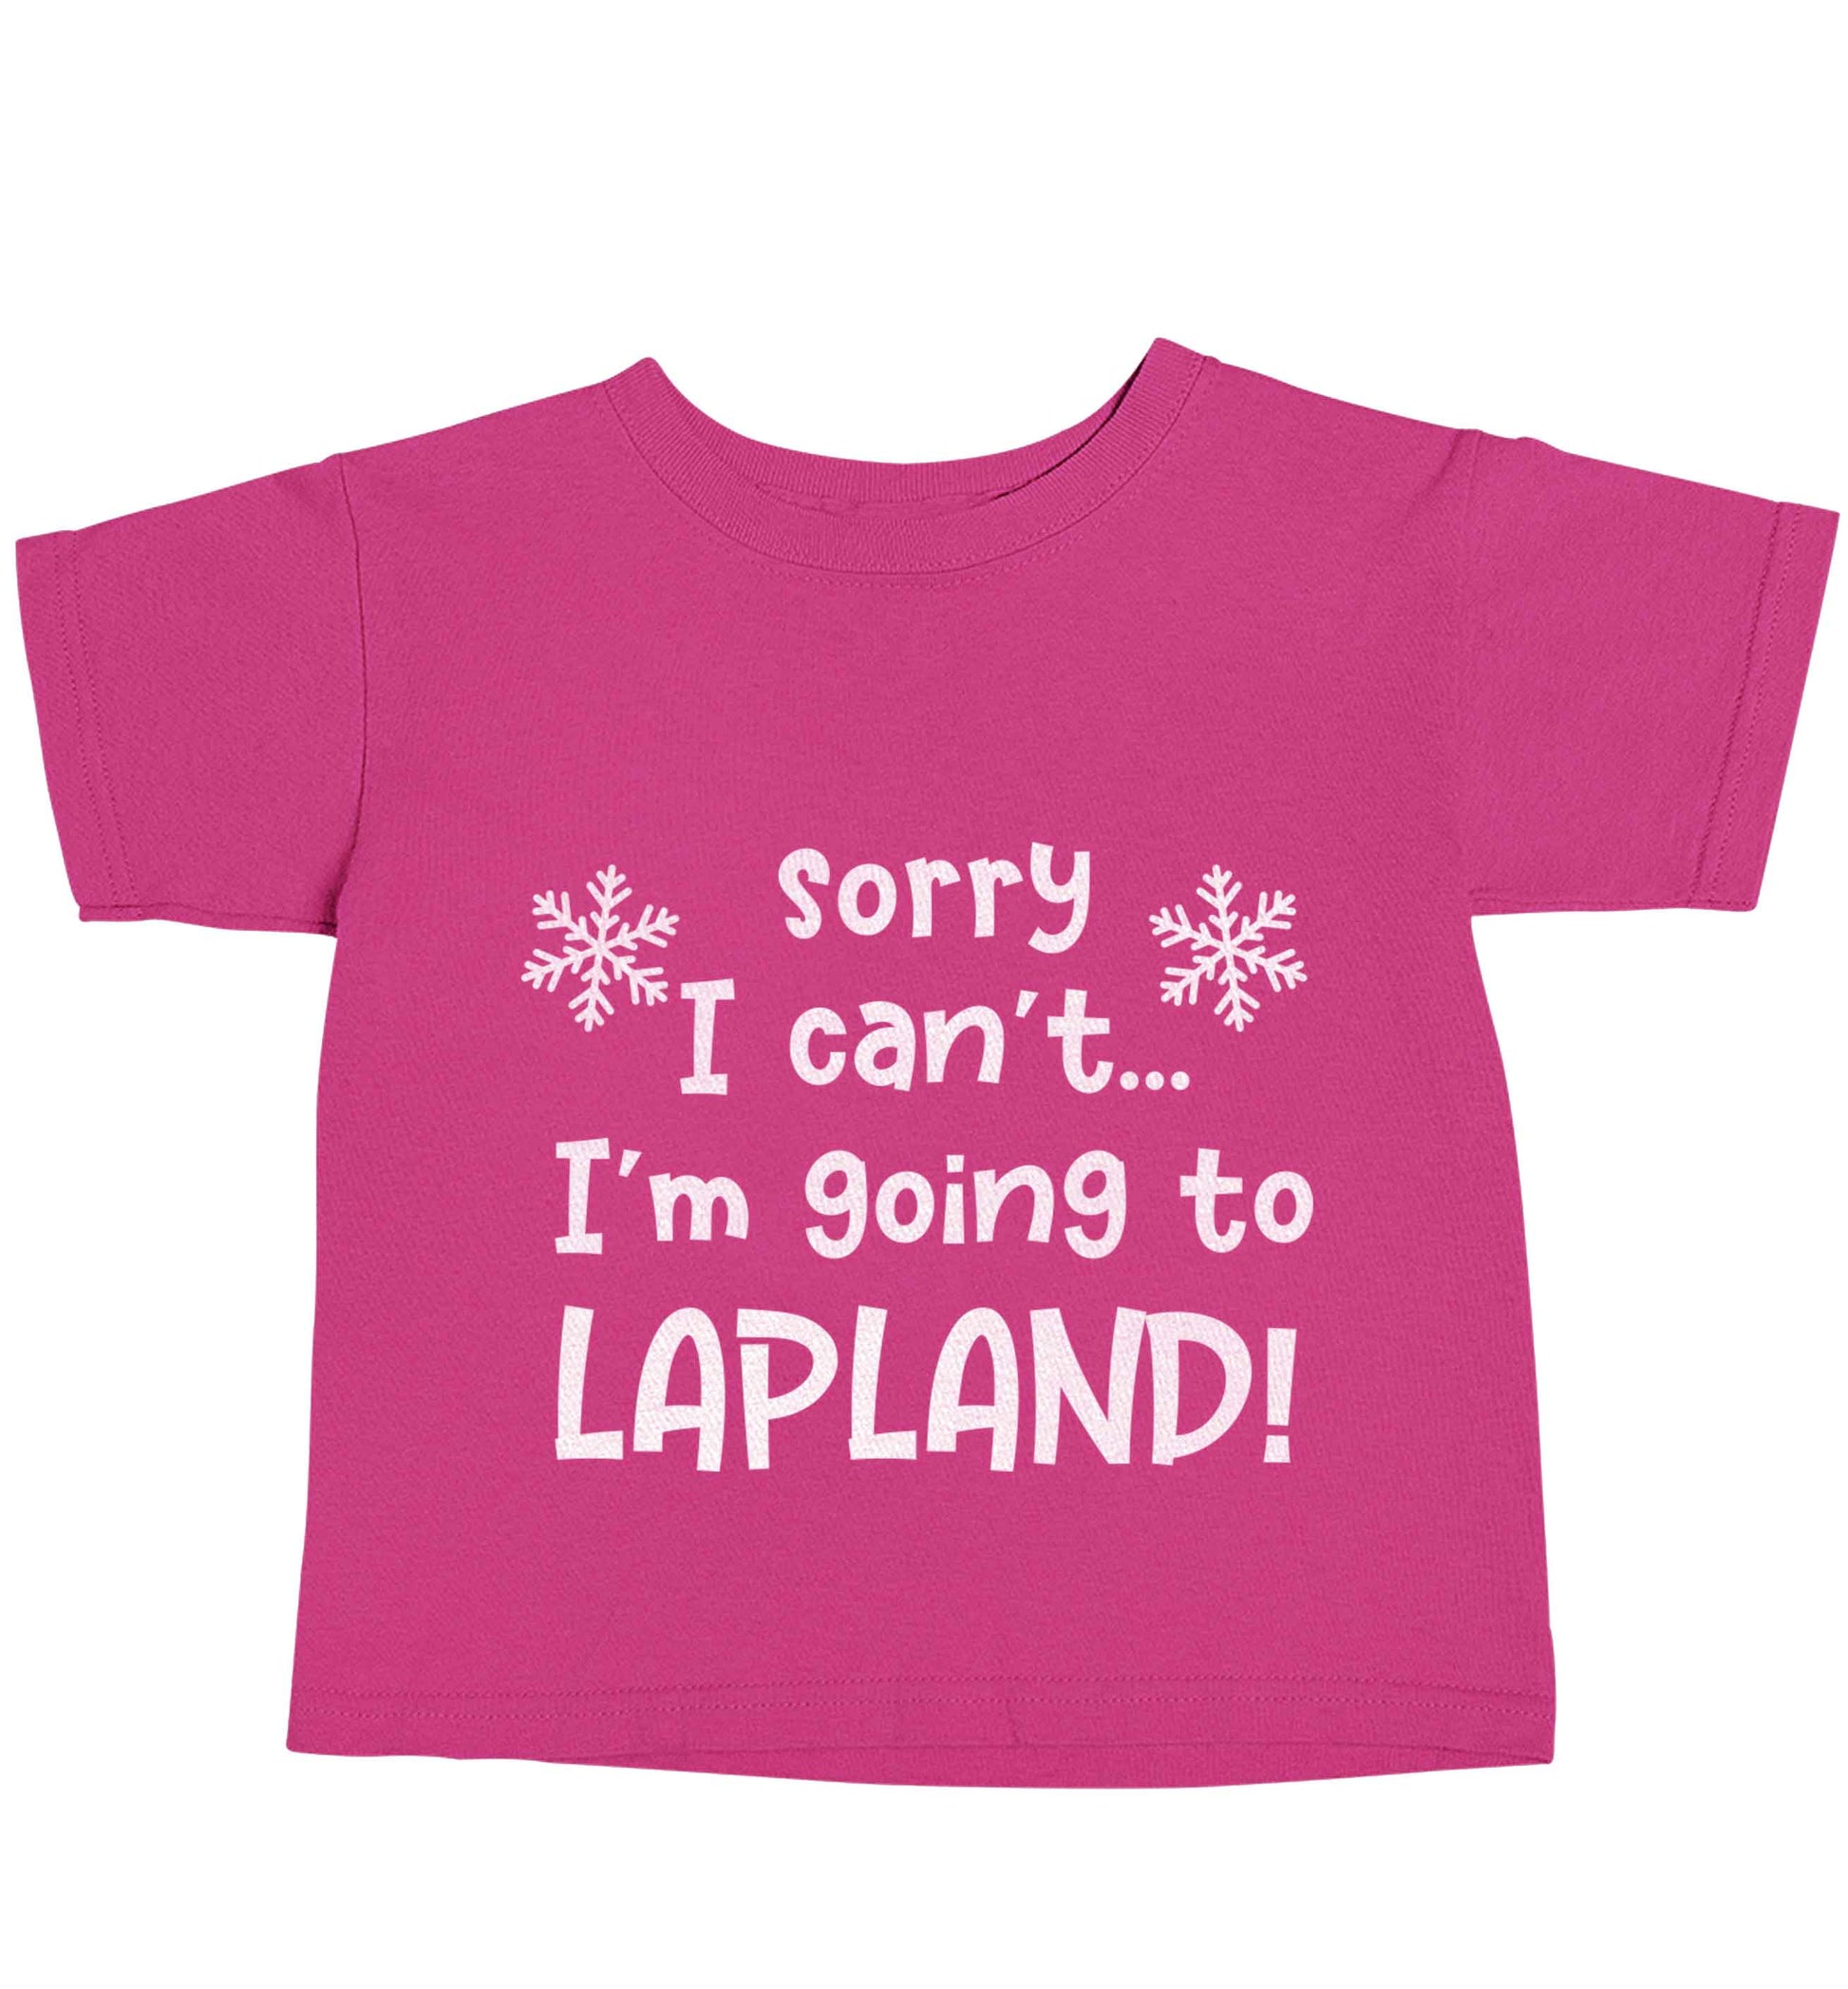 Sorry I can't I'm going to Lapland pink baby toddler Tshirt 2 Years